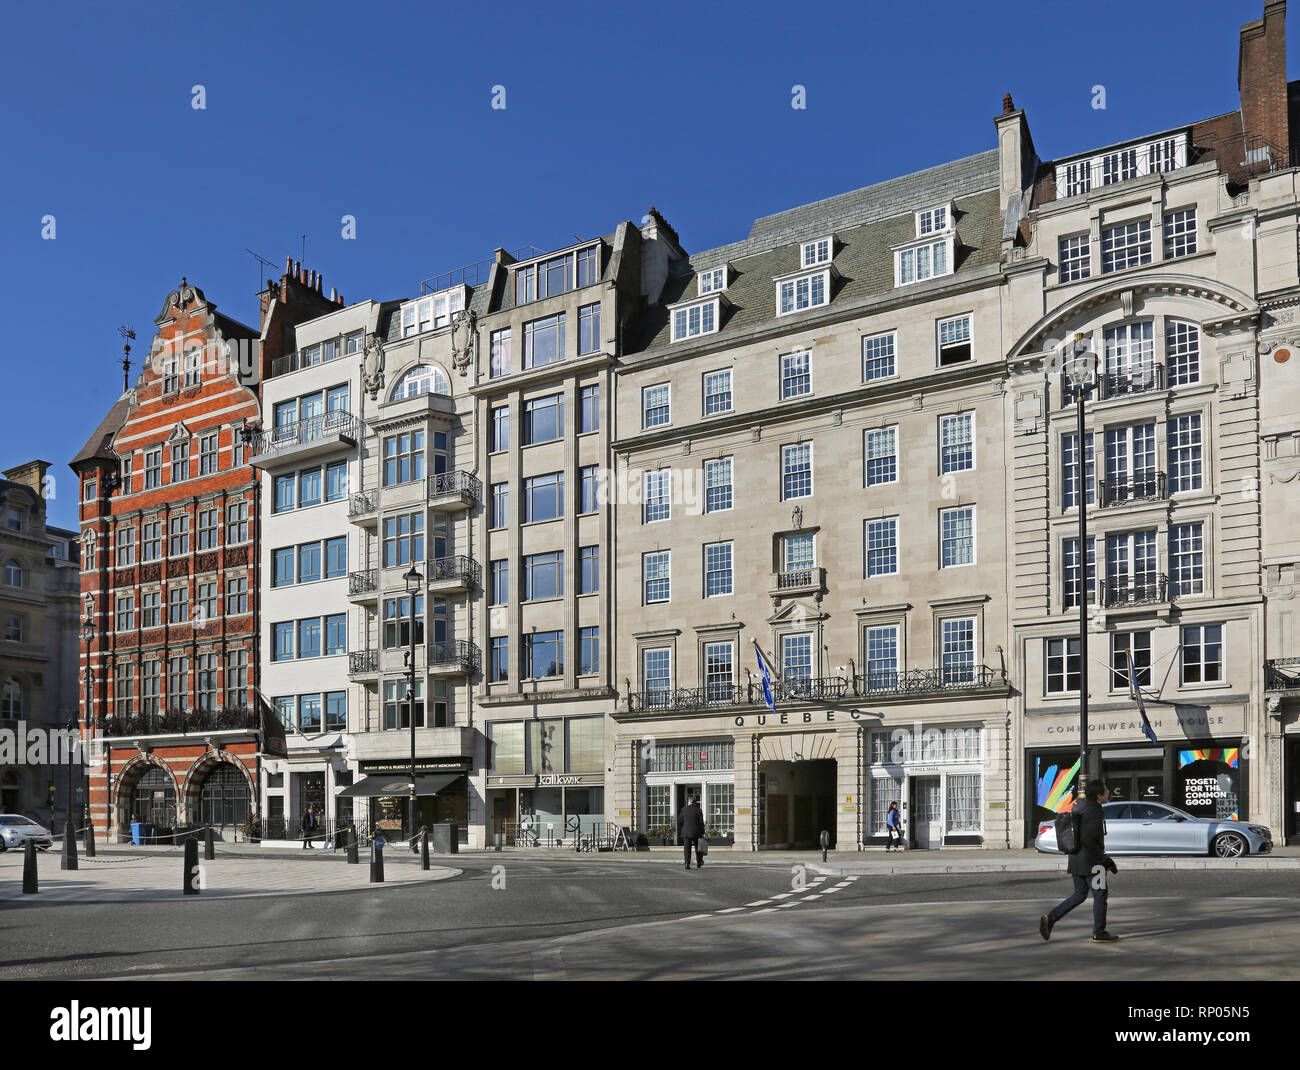 Classical buildings on Pall Mall, London. Shows Quebec House (centre) and Commonwealth House (right). Corner of St James's Street (left). Stock Photo